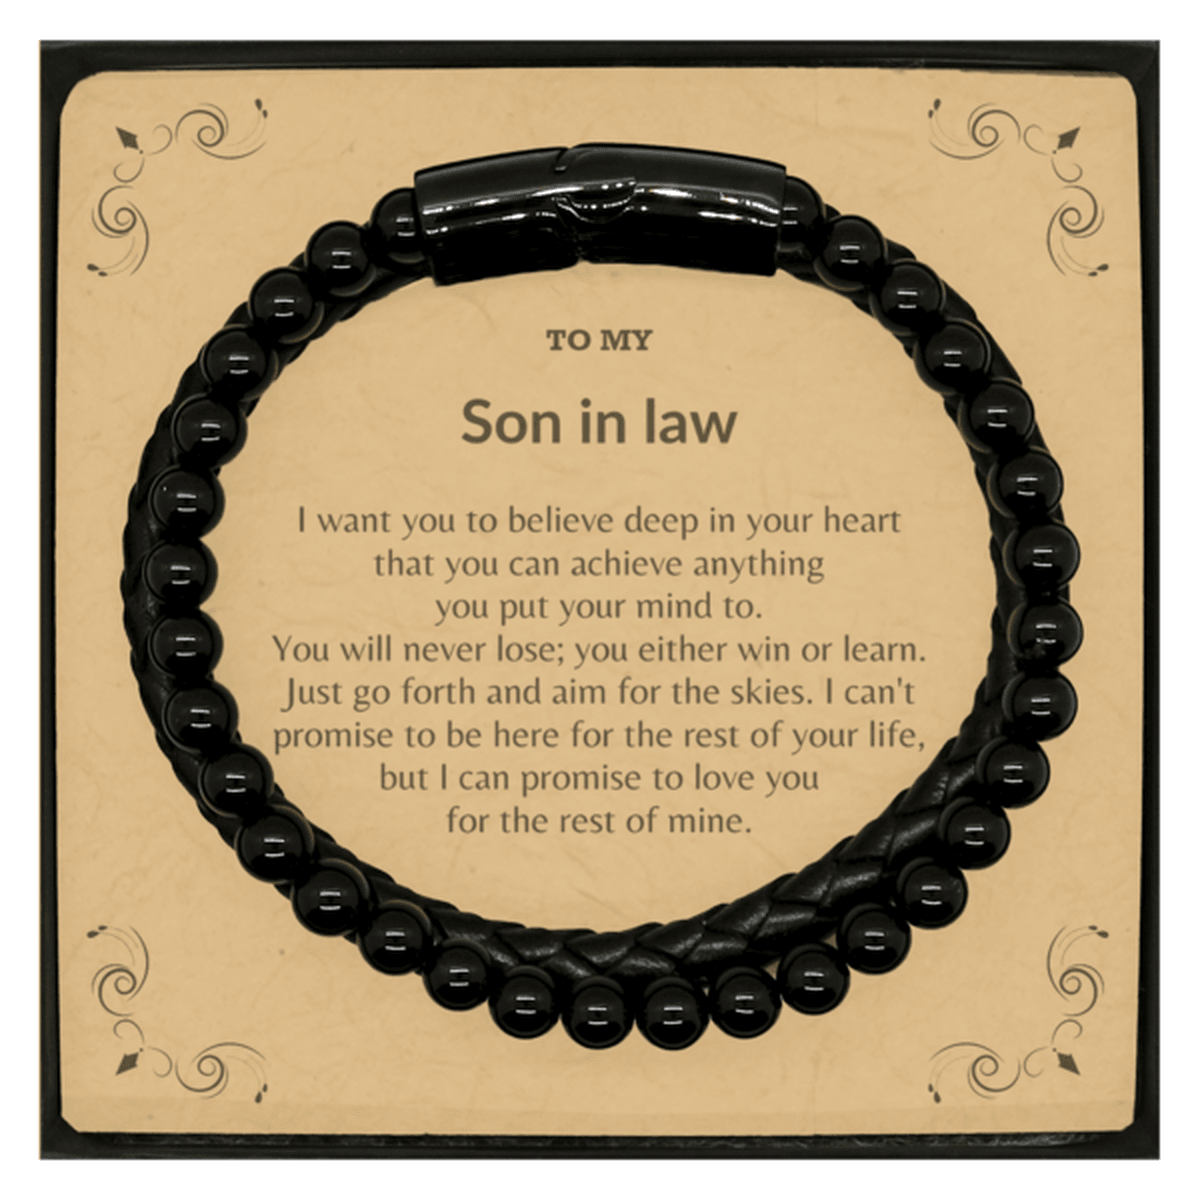 Motivational Son In Law Stone Leather Bracelets, Son In Law I can promise to love you for the rest of mine, Bracelet with Message Card For Son In Law, Son In Law Birthday Jewelry Gift for Women Men - Mallard Moon Gift Shop